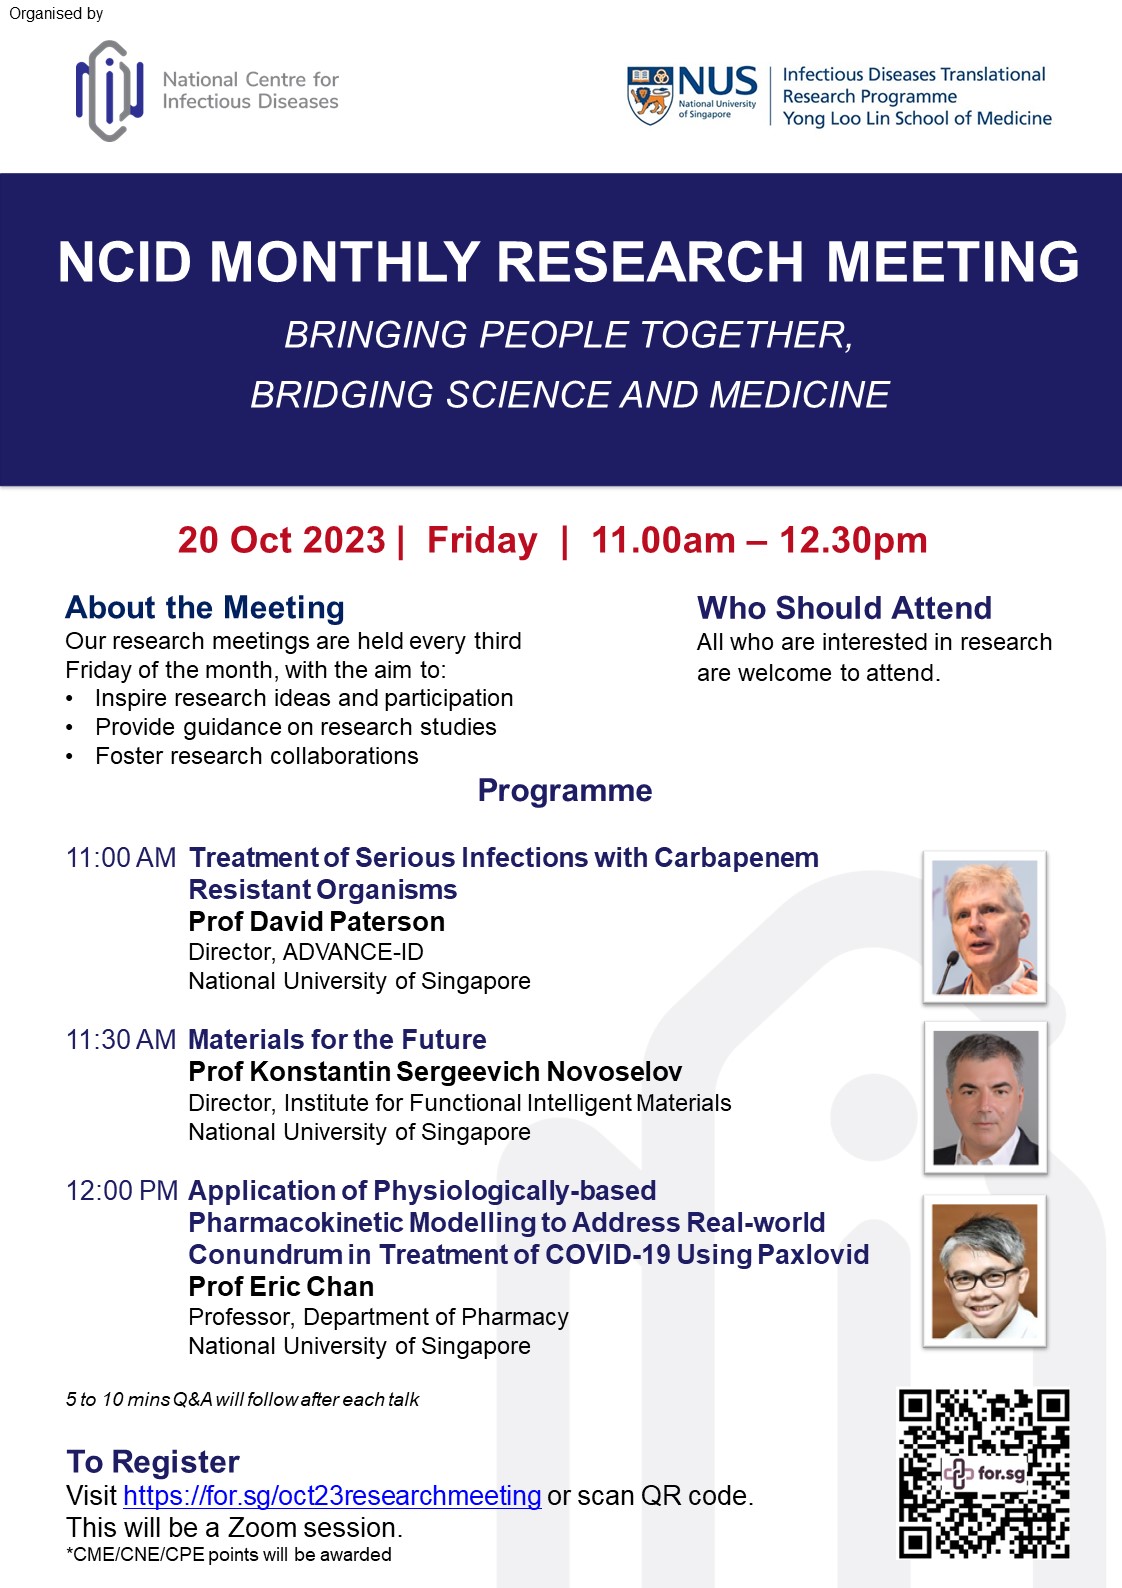 NCID Research Meeting Publicity Poster_Oct2023 (1).JPG